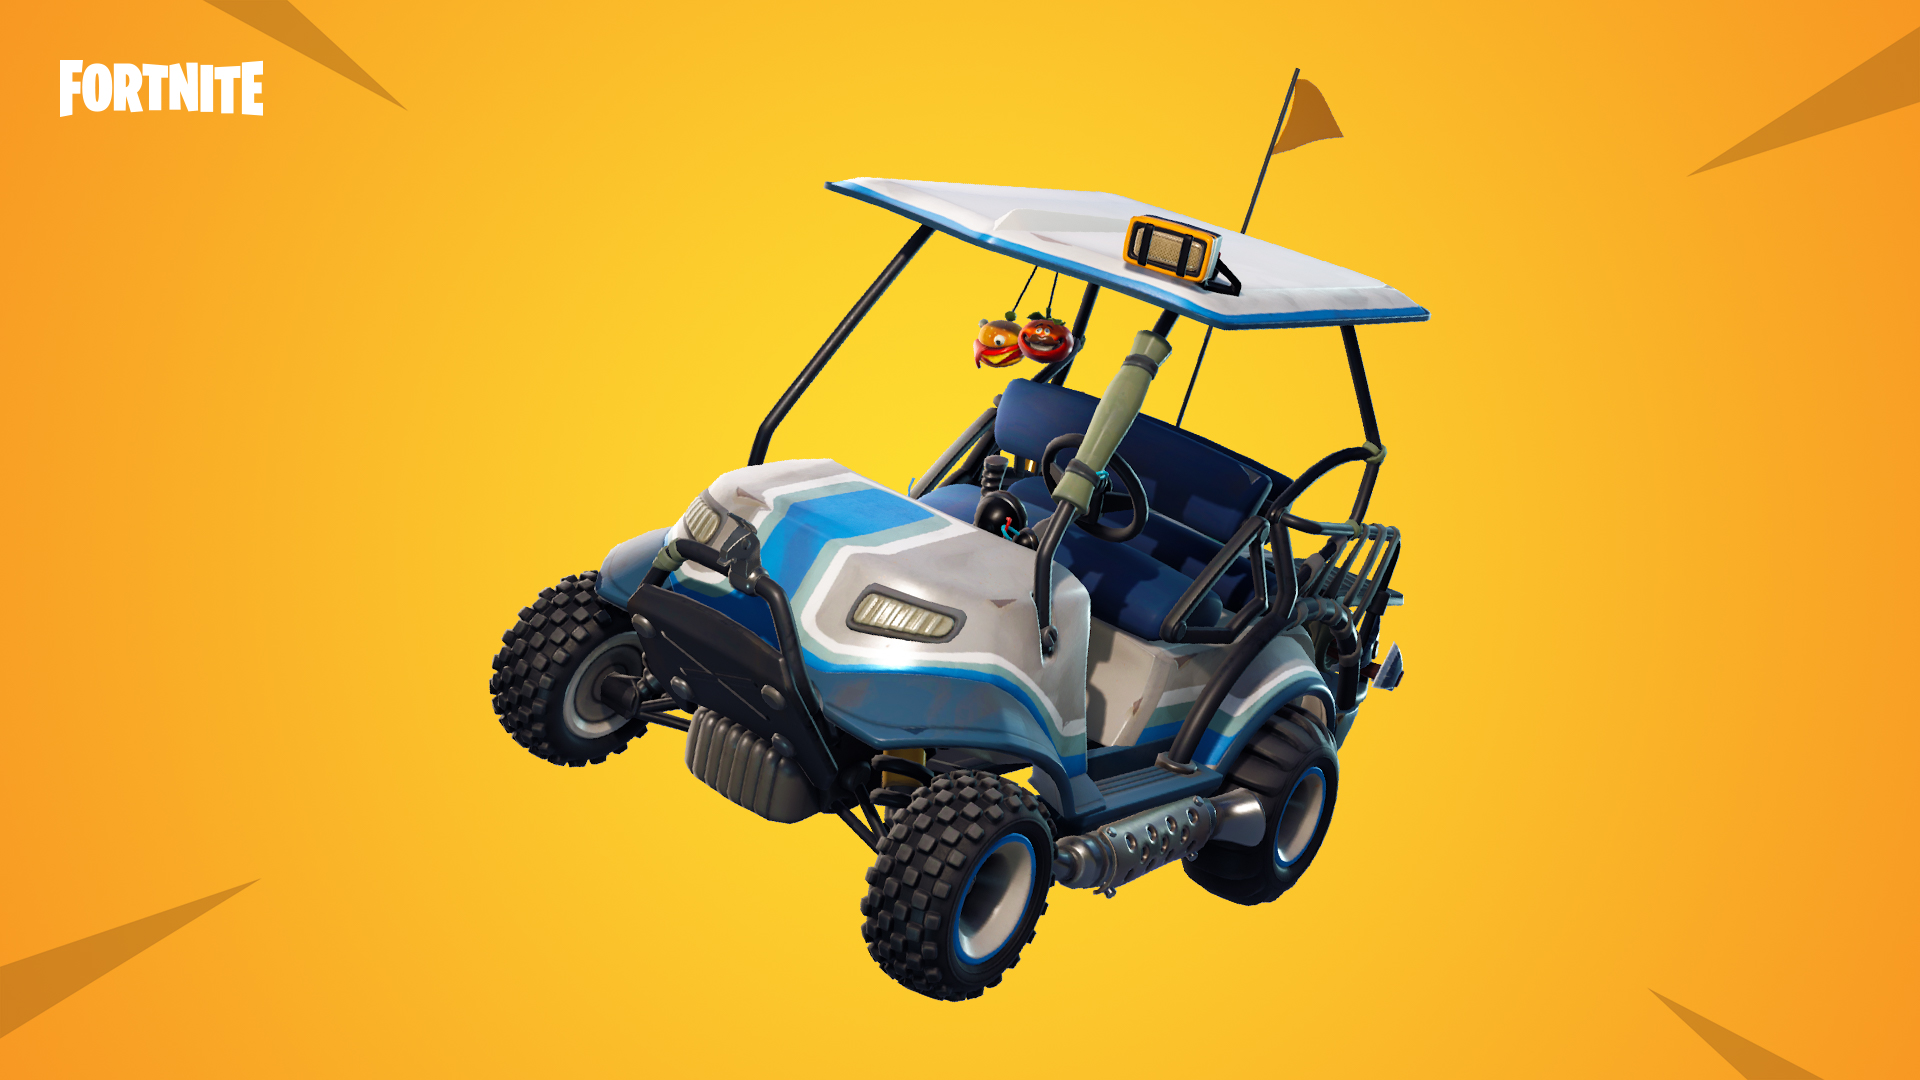 the all terrain kart lets you powerslide across the map with friends or solo and just have fun if you ve wanted to drive a seemingly suped up golf kart - fortnite switch controls